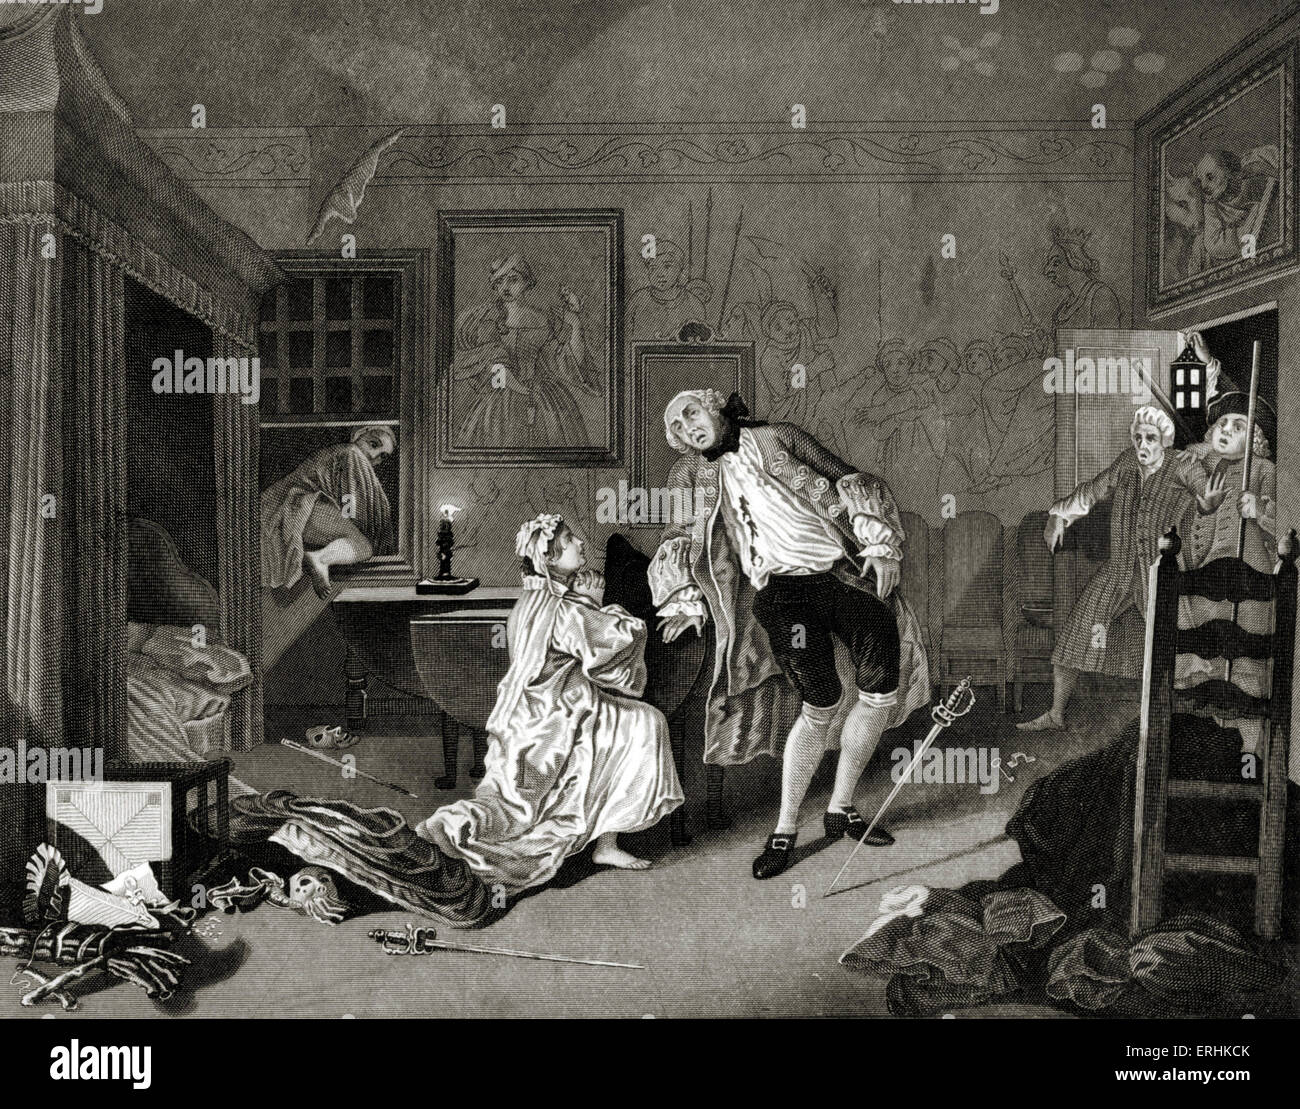 Marriage a la Mode - The Divorce - engraving by William Hogarth, English painter and artist November 10, 1697 -October 26, 1764. Printed by A H Payne. Social life in 18th century England. Witty artistic interpretation. Stock Photo